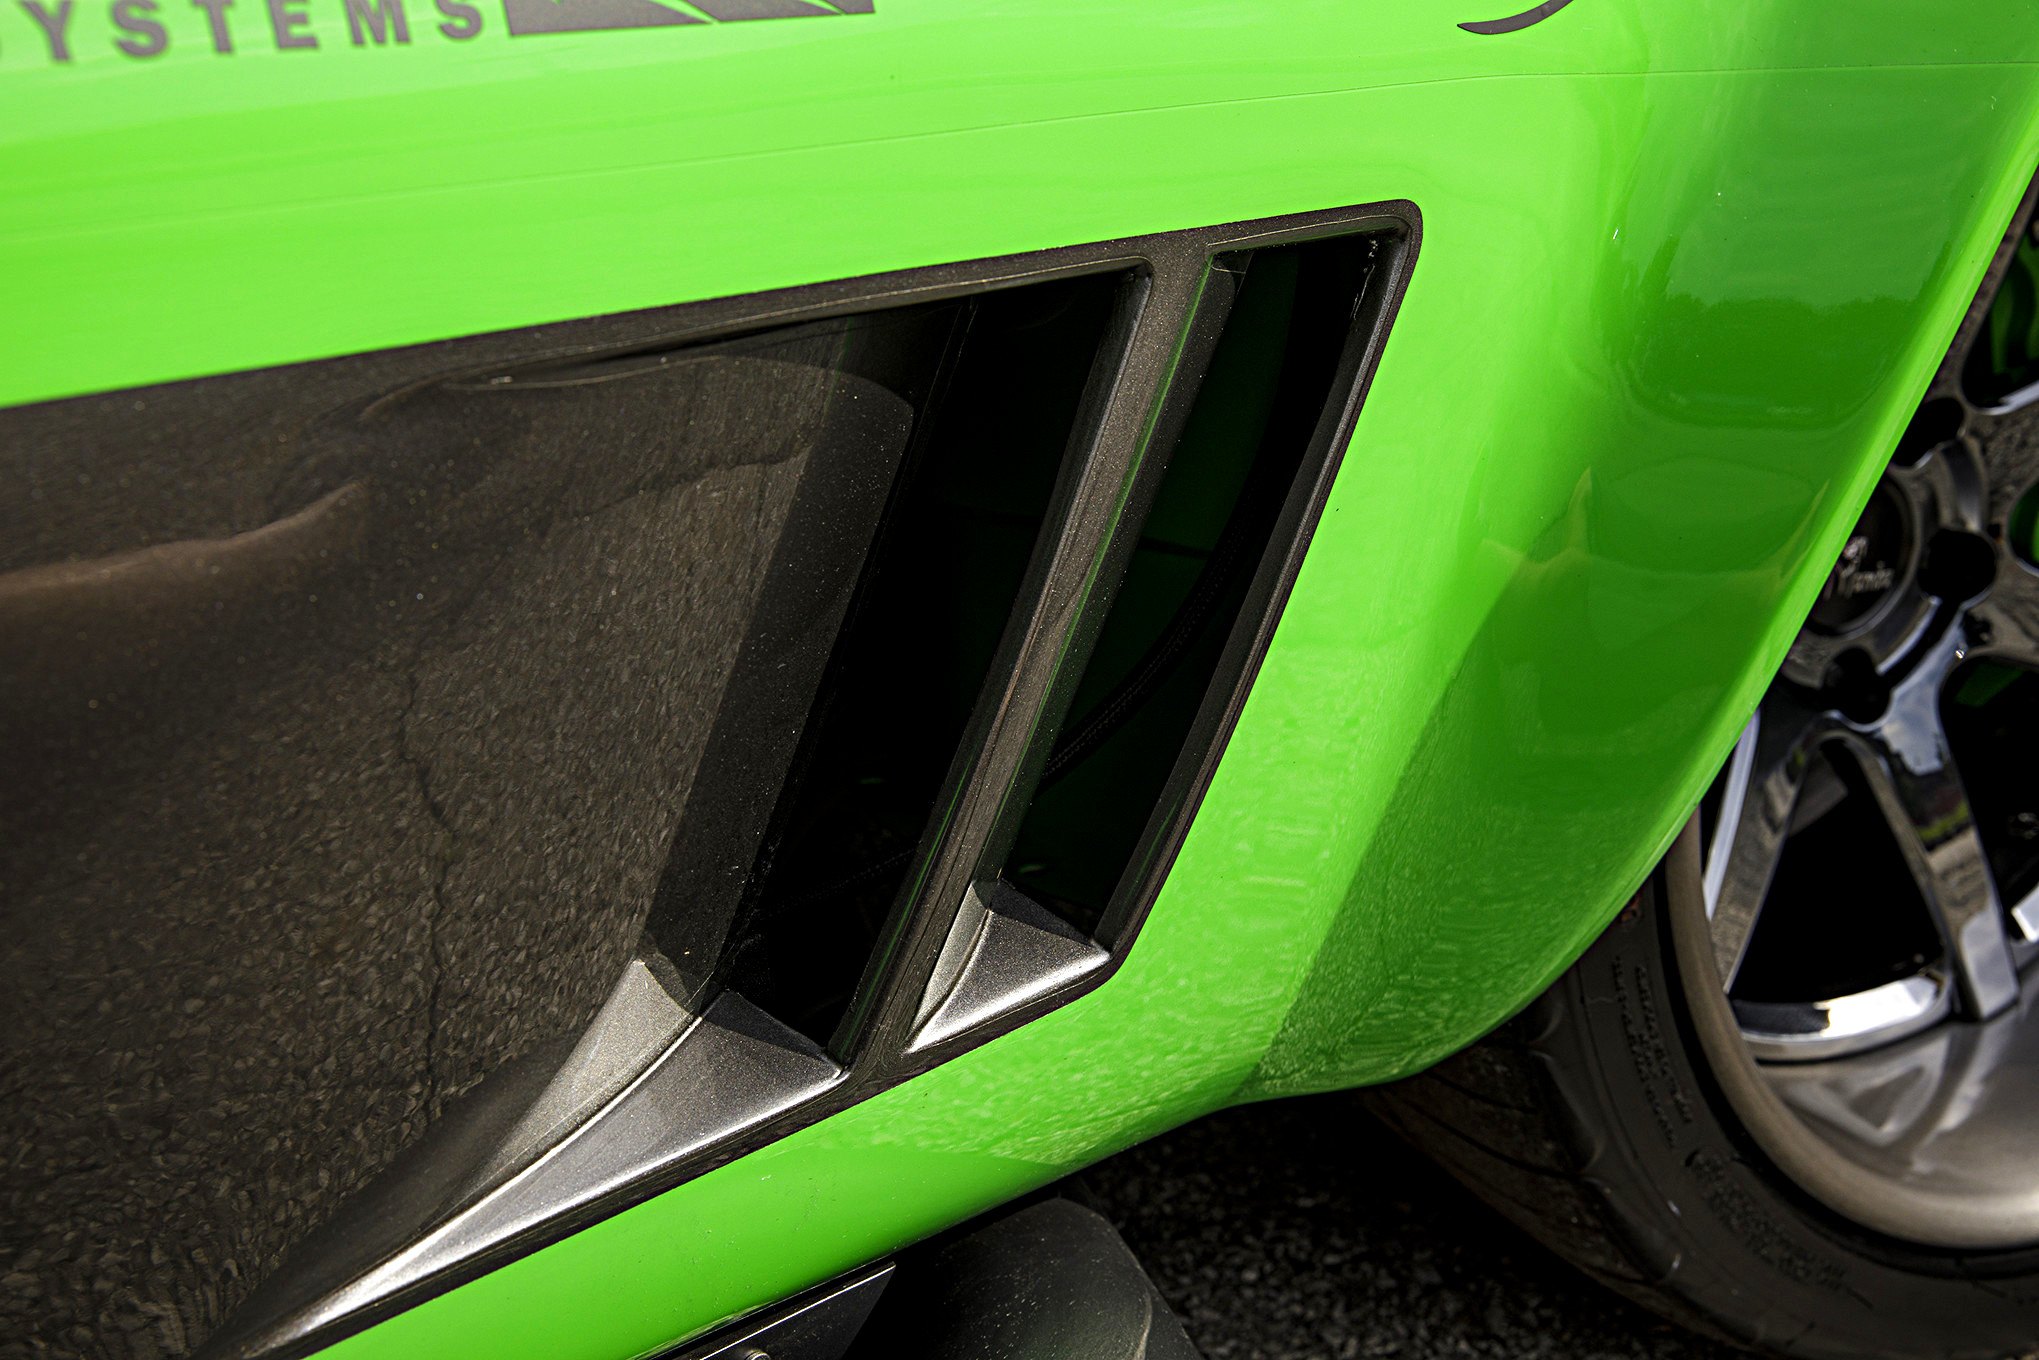 Aftermarket Side Vents on Green Debadged Chevy Corvette - Photo by Robert McGaffin